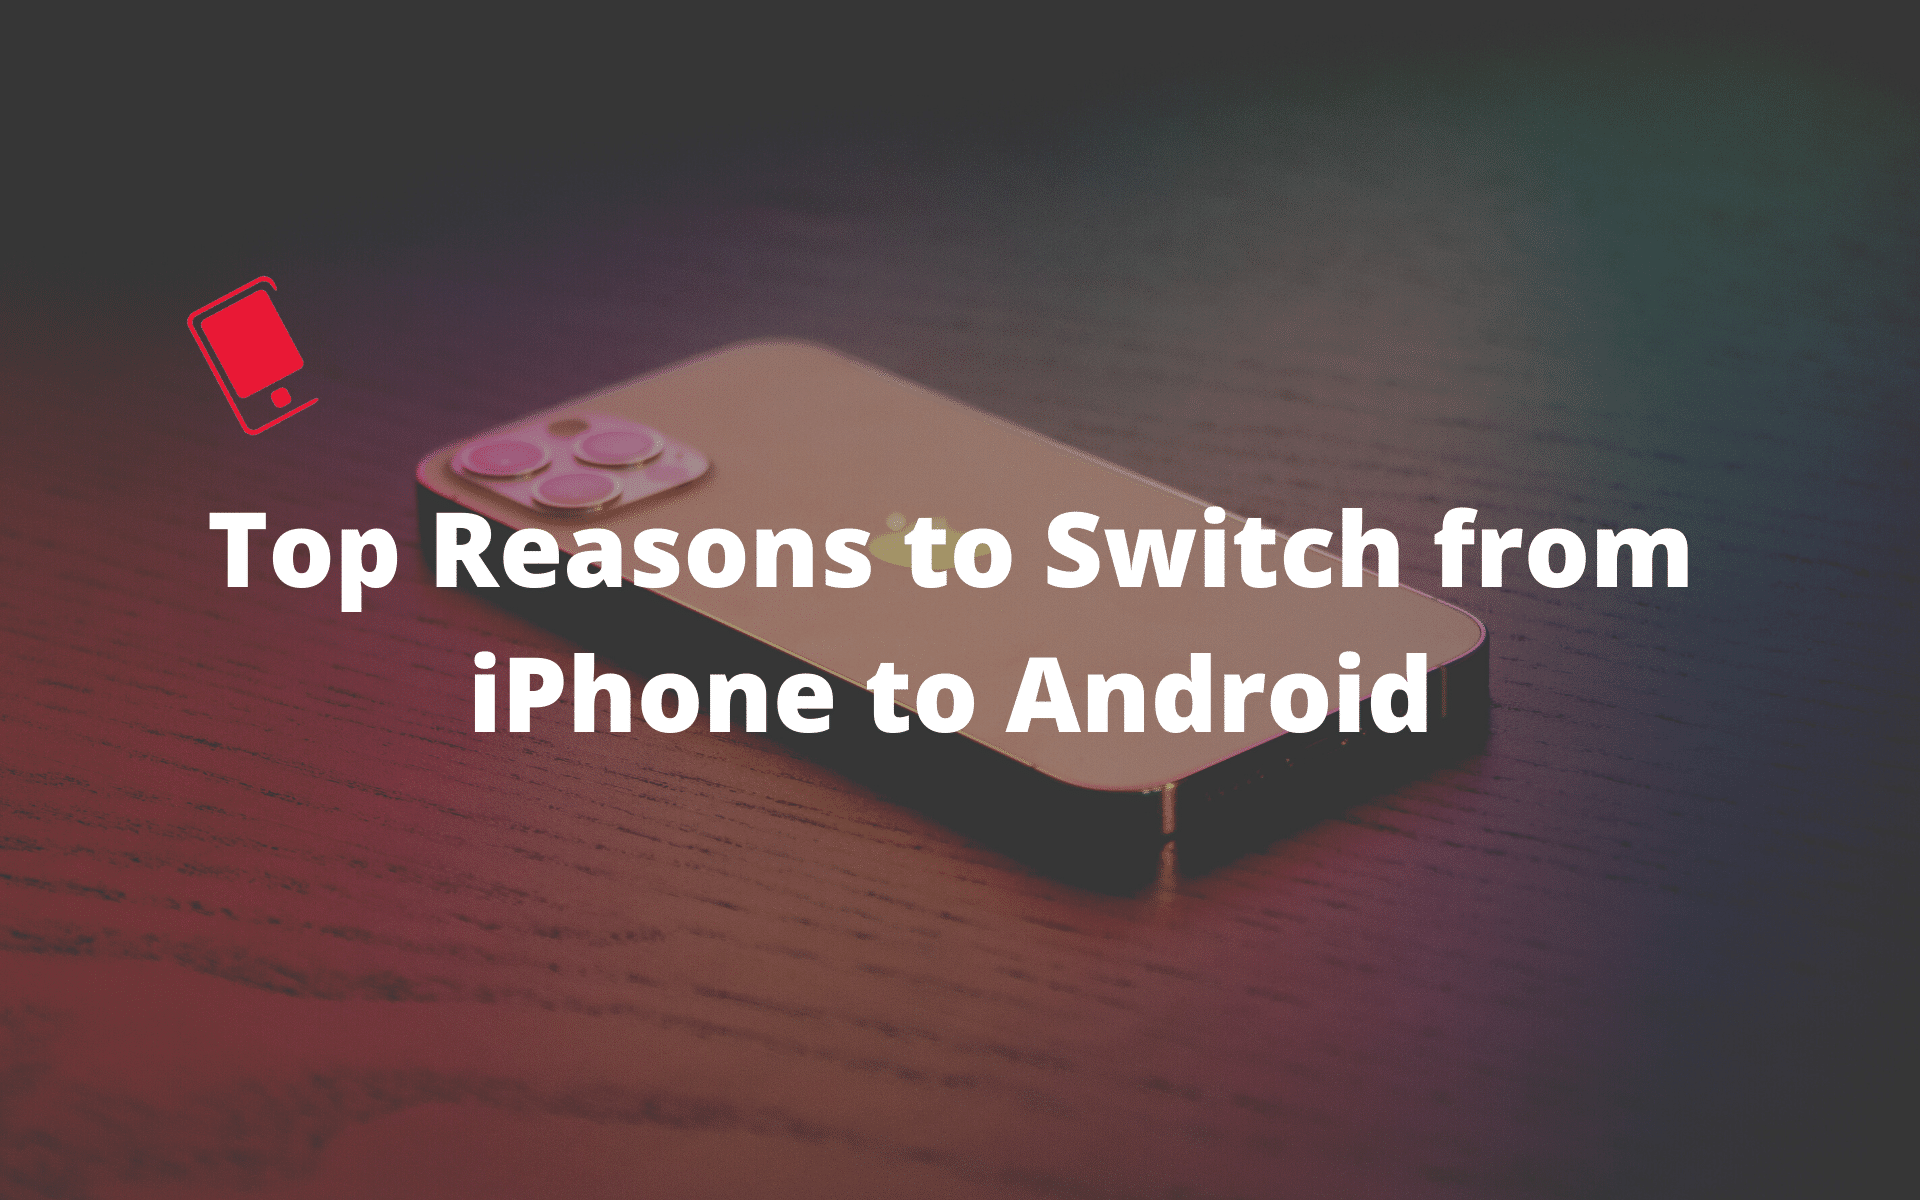 switch from iPhone to Android